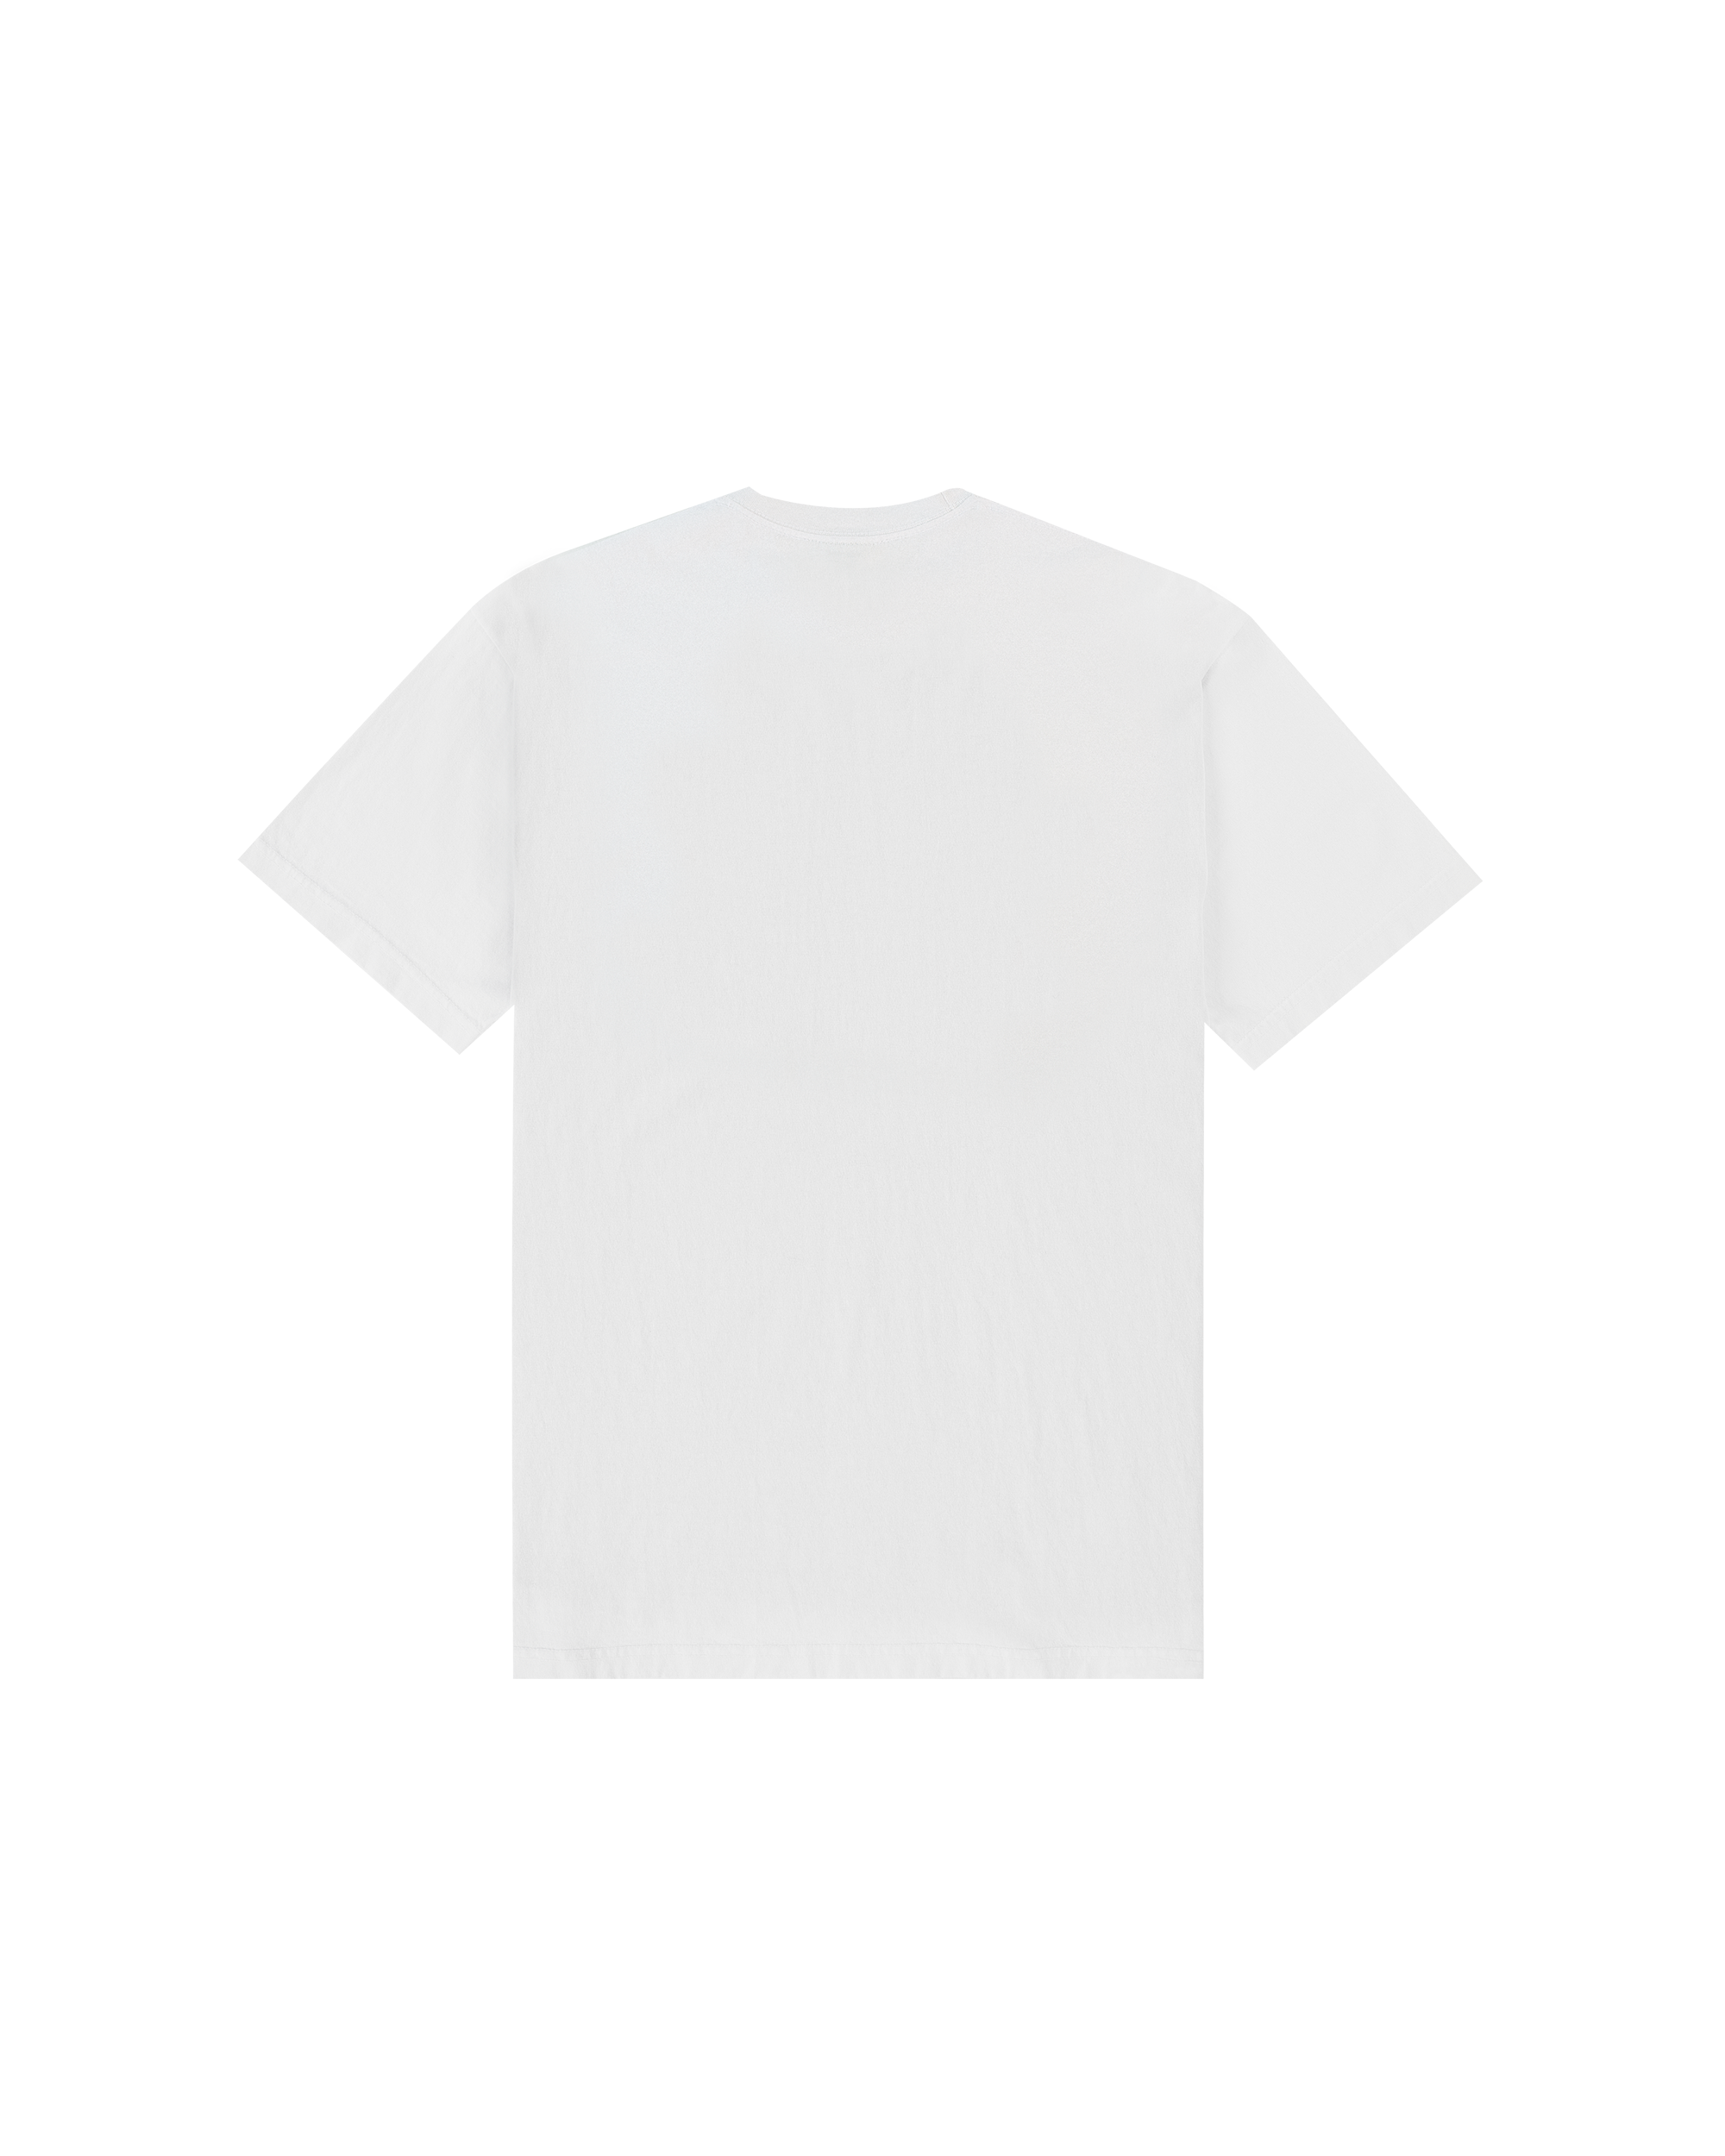 House of Plants T-shirt - White